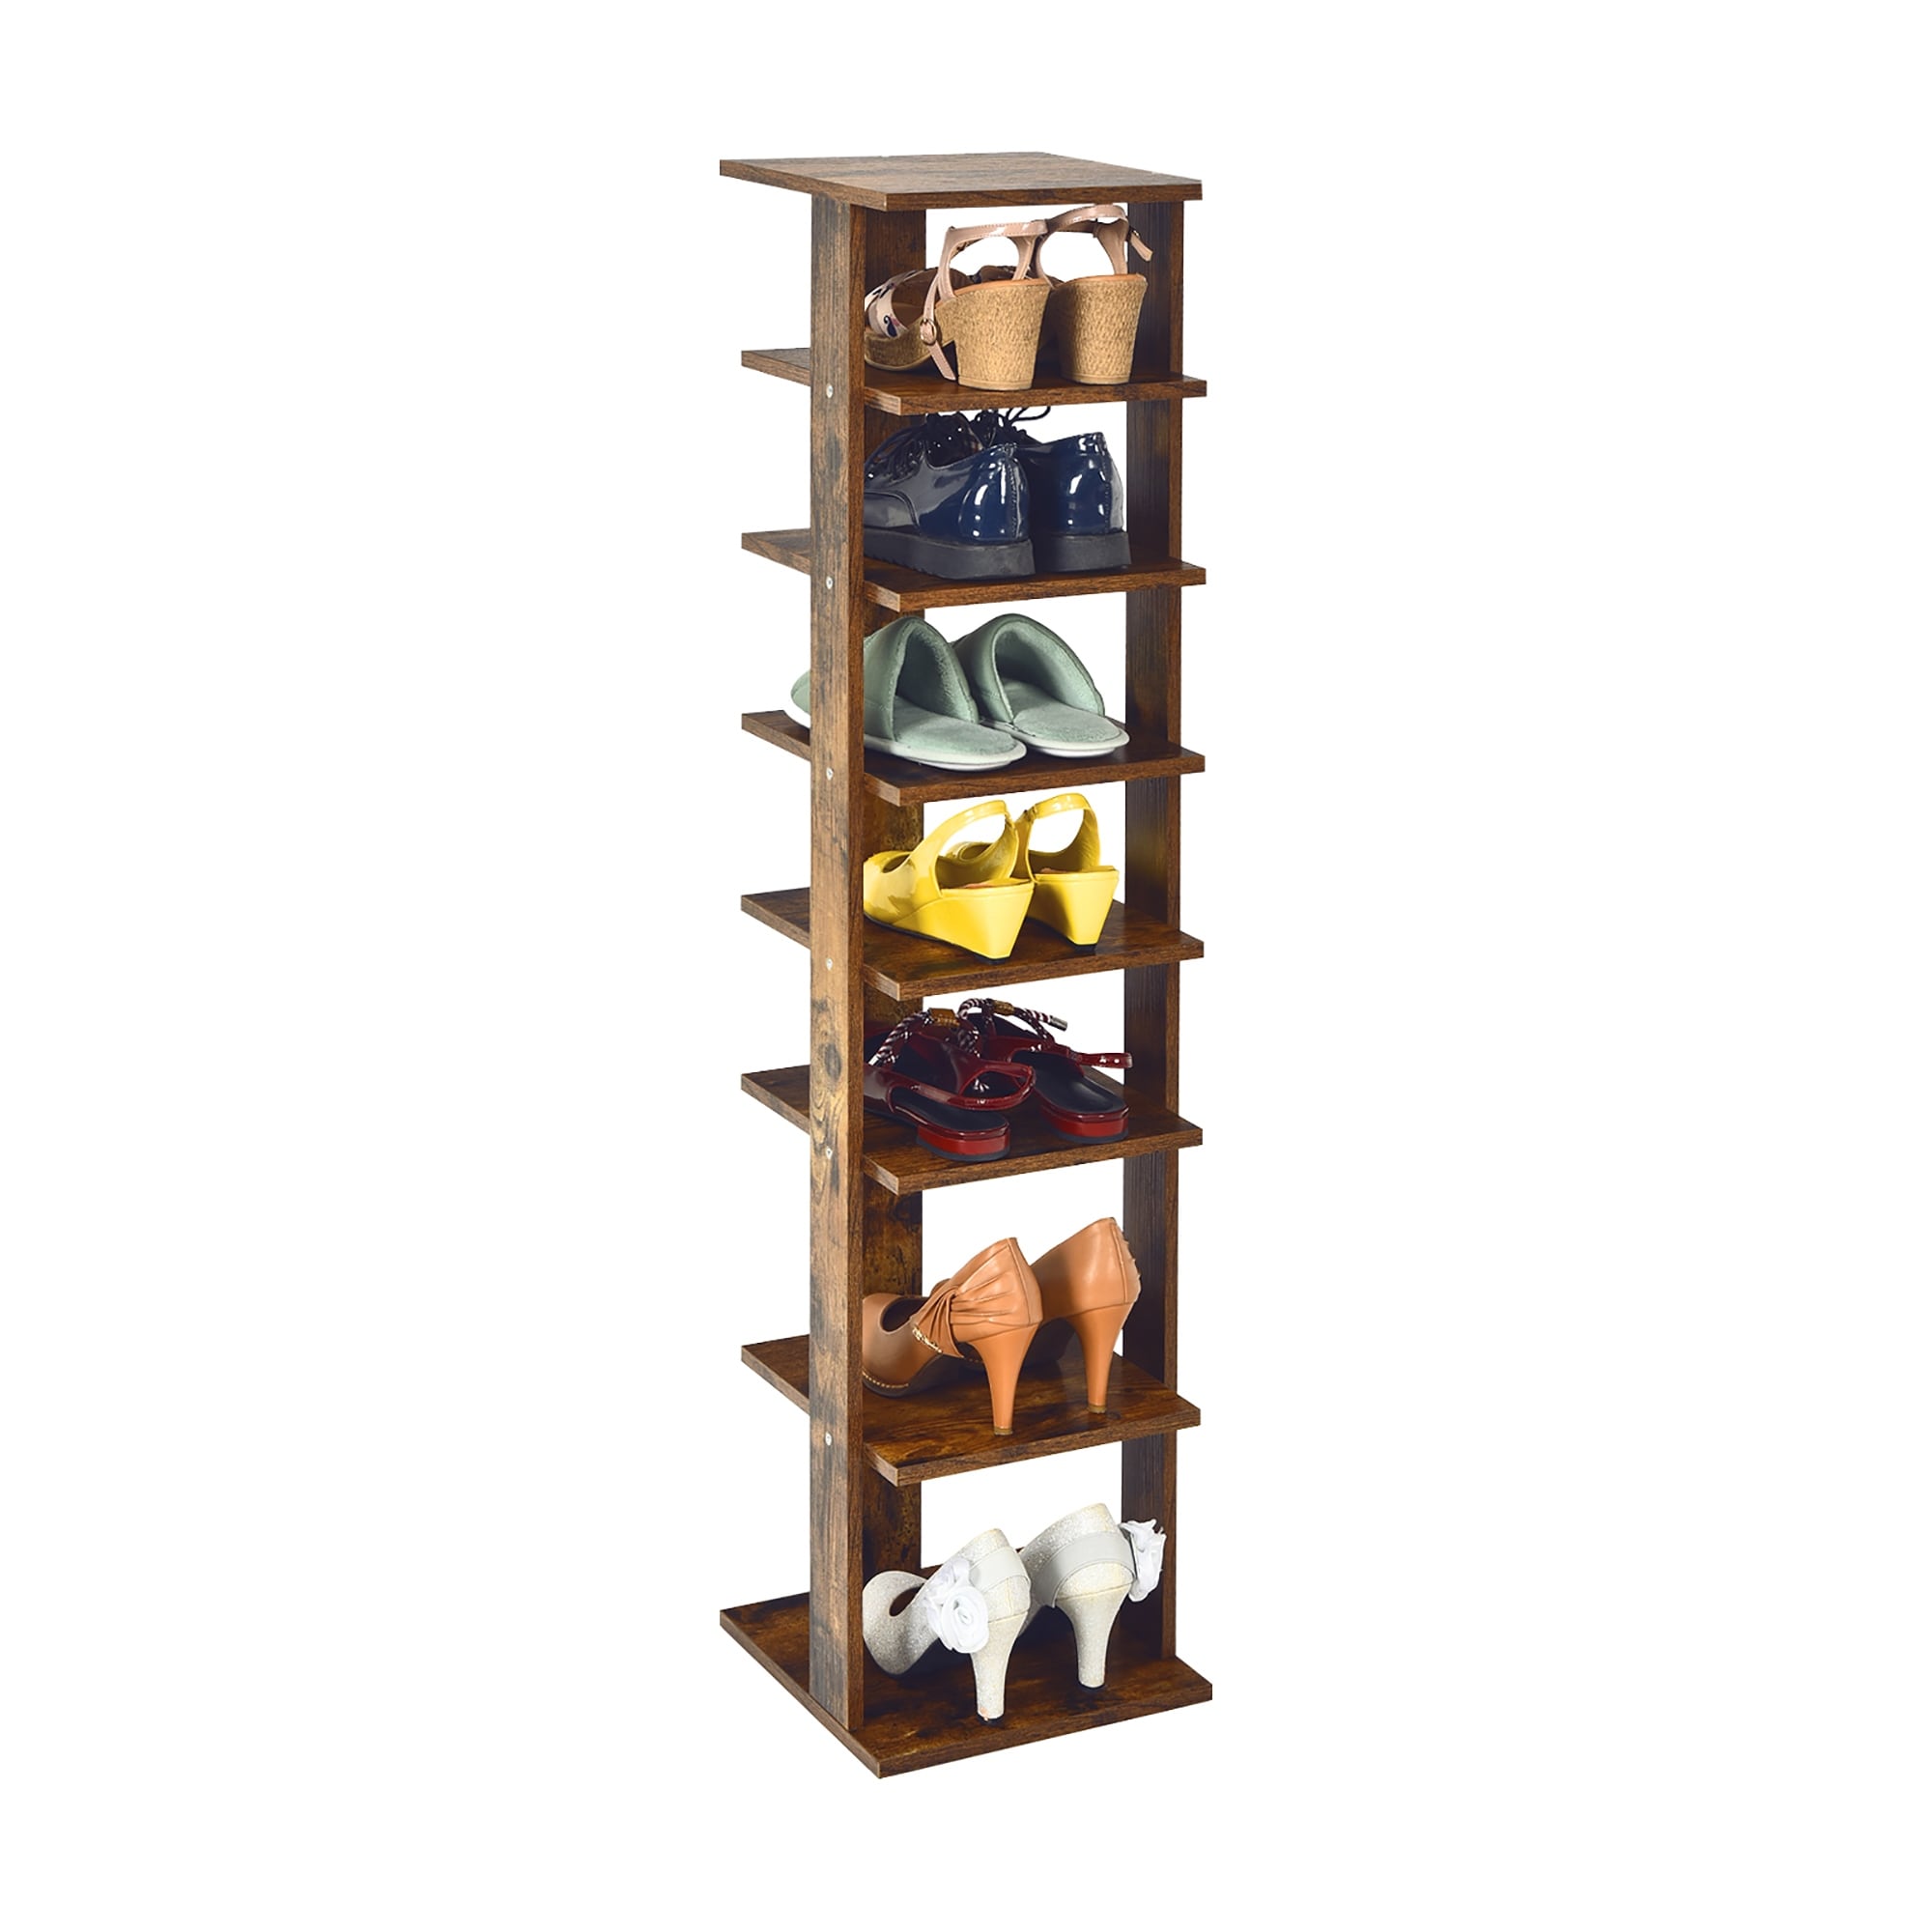 Wood Shoe Rack Narrow Shoe Rack 8 Tier ,Vertical Shoe Shelf for Small  Spaces, Tall Skinny Shoe Organizer for Entryway Closet Corner Bedroom and  Garage